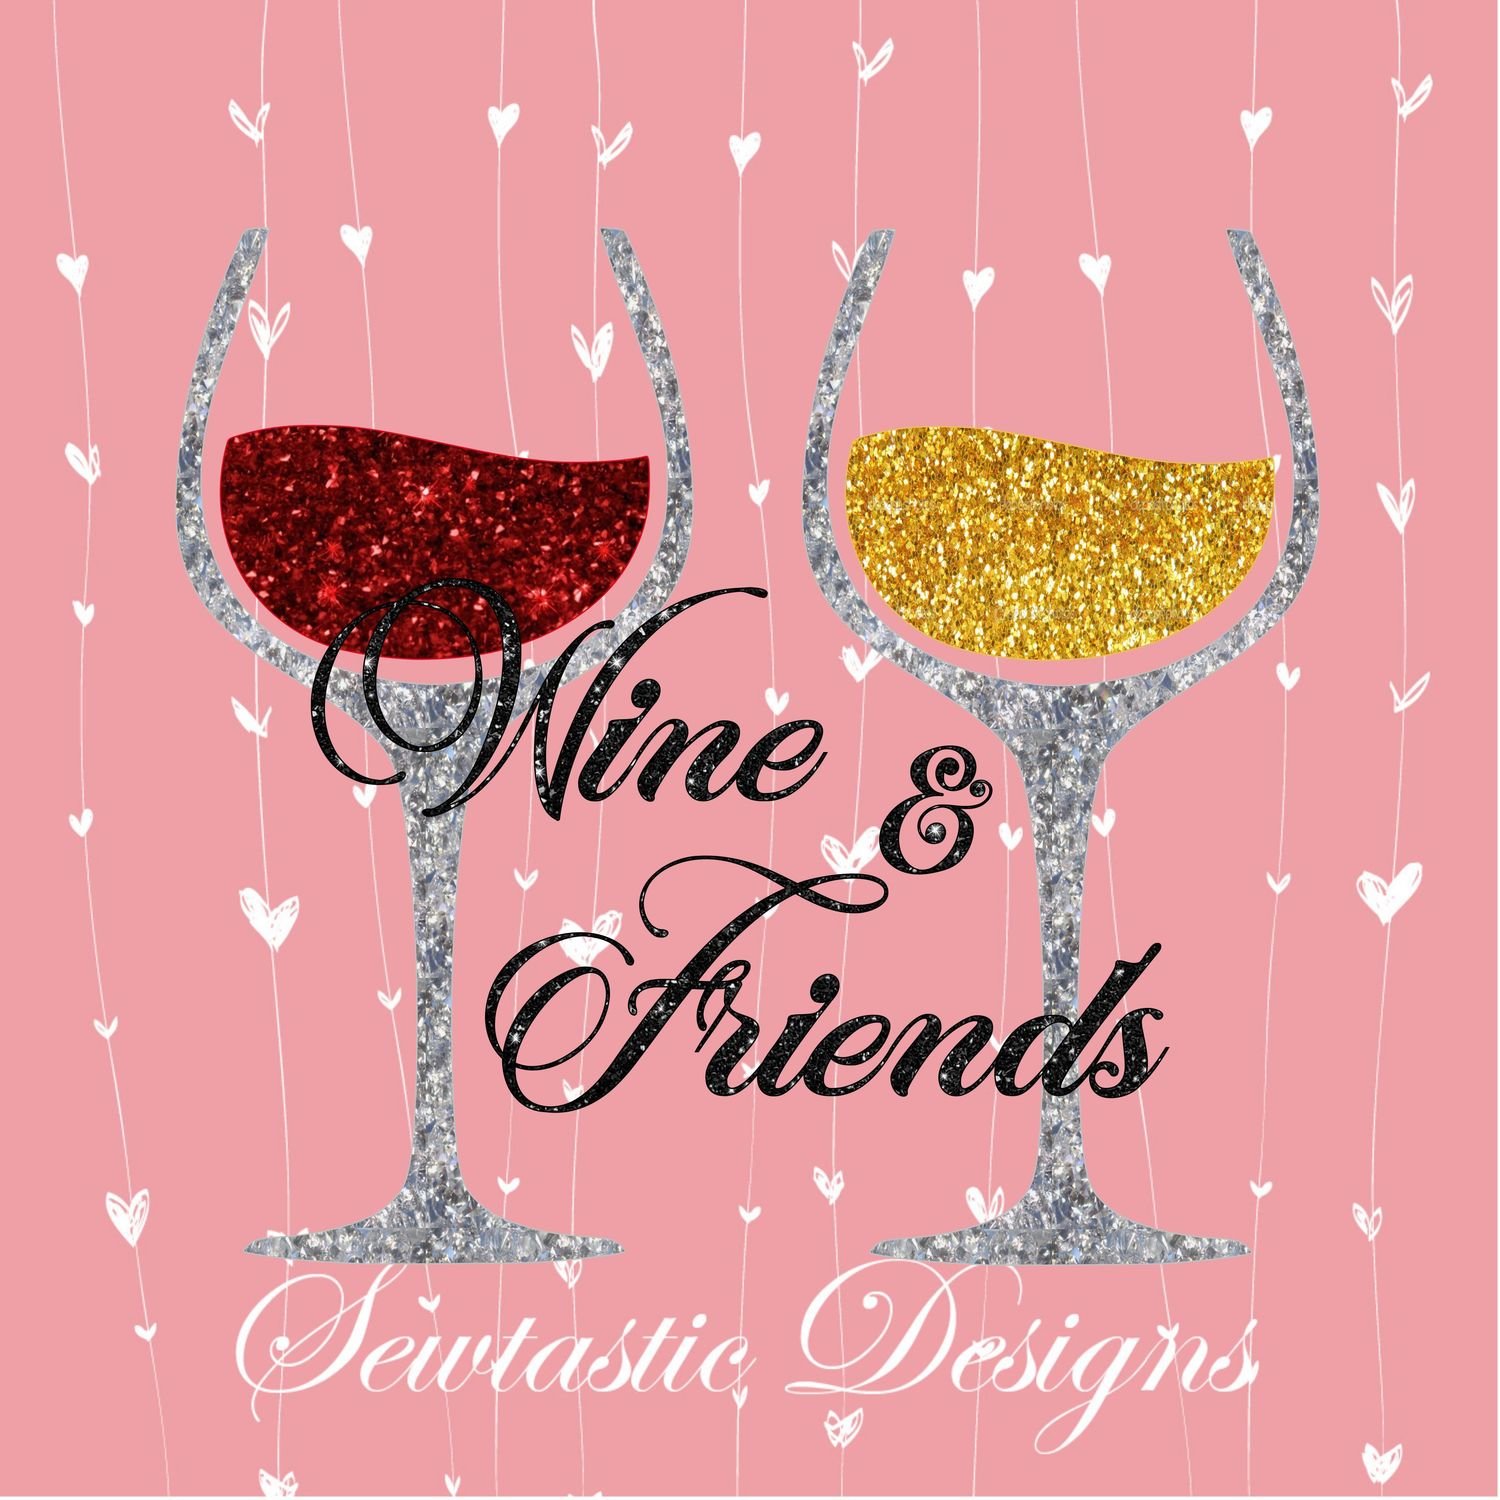 Free Free 349 Good Friends Wine Together Svg Free SVG PNG EPS DXF File